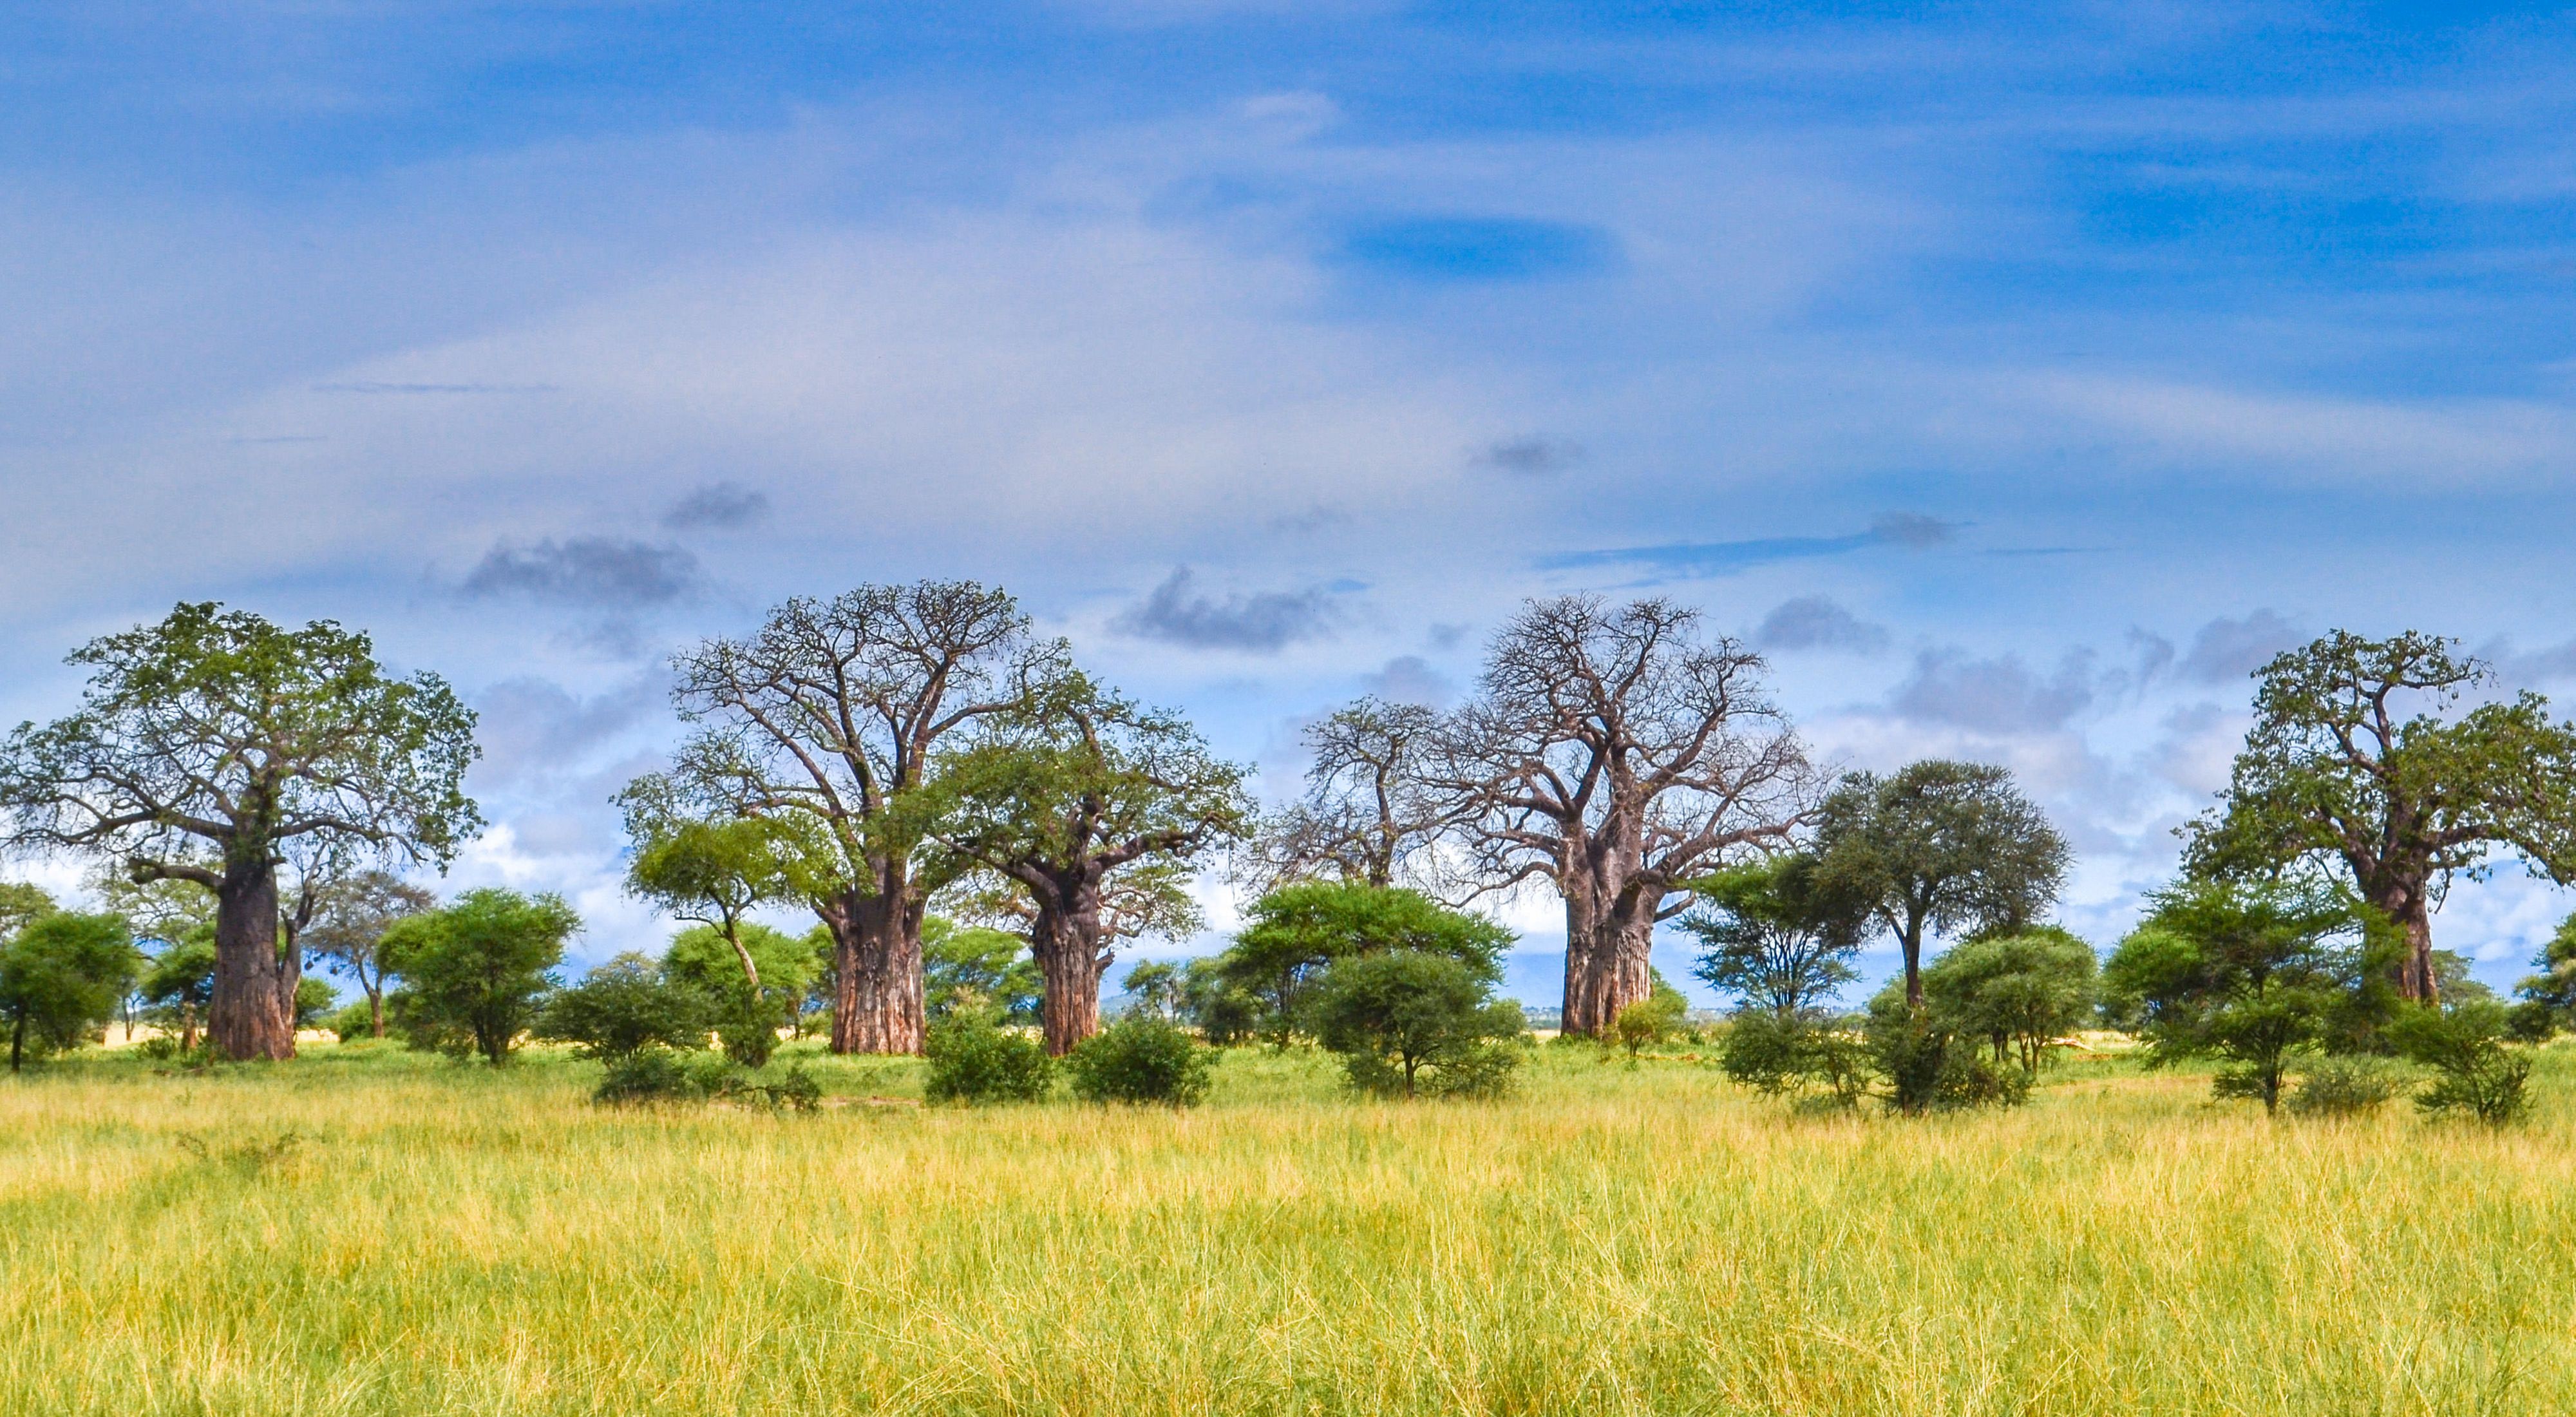 Landscape view of a grassy field with several large baobab trees and other smaller trees.